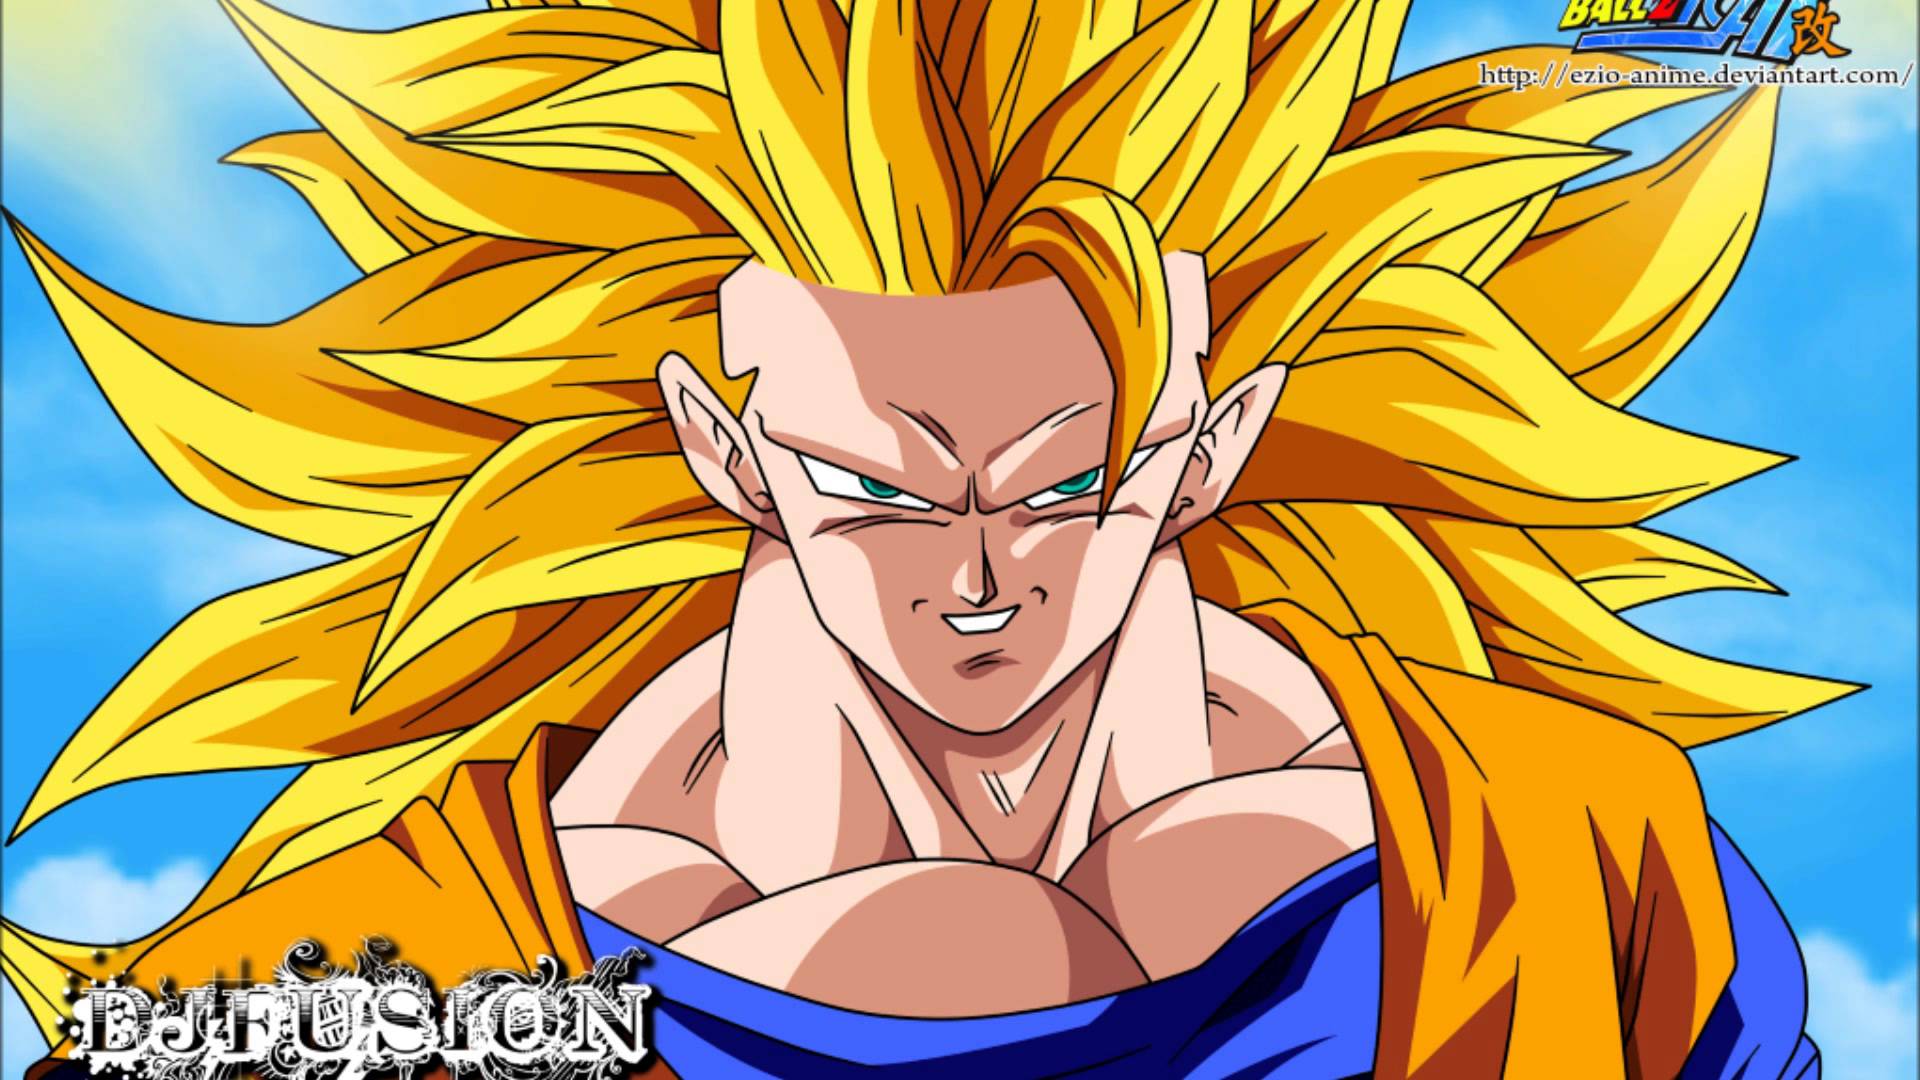 40+ Super Saiyan 3 HD Wallpapers and Backgrounds